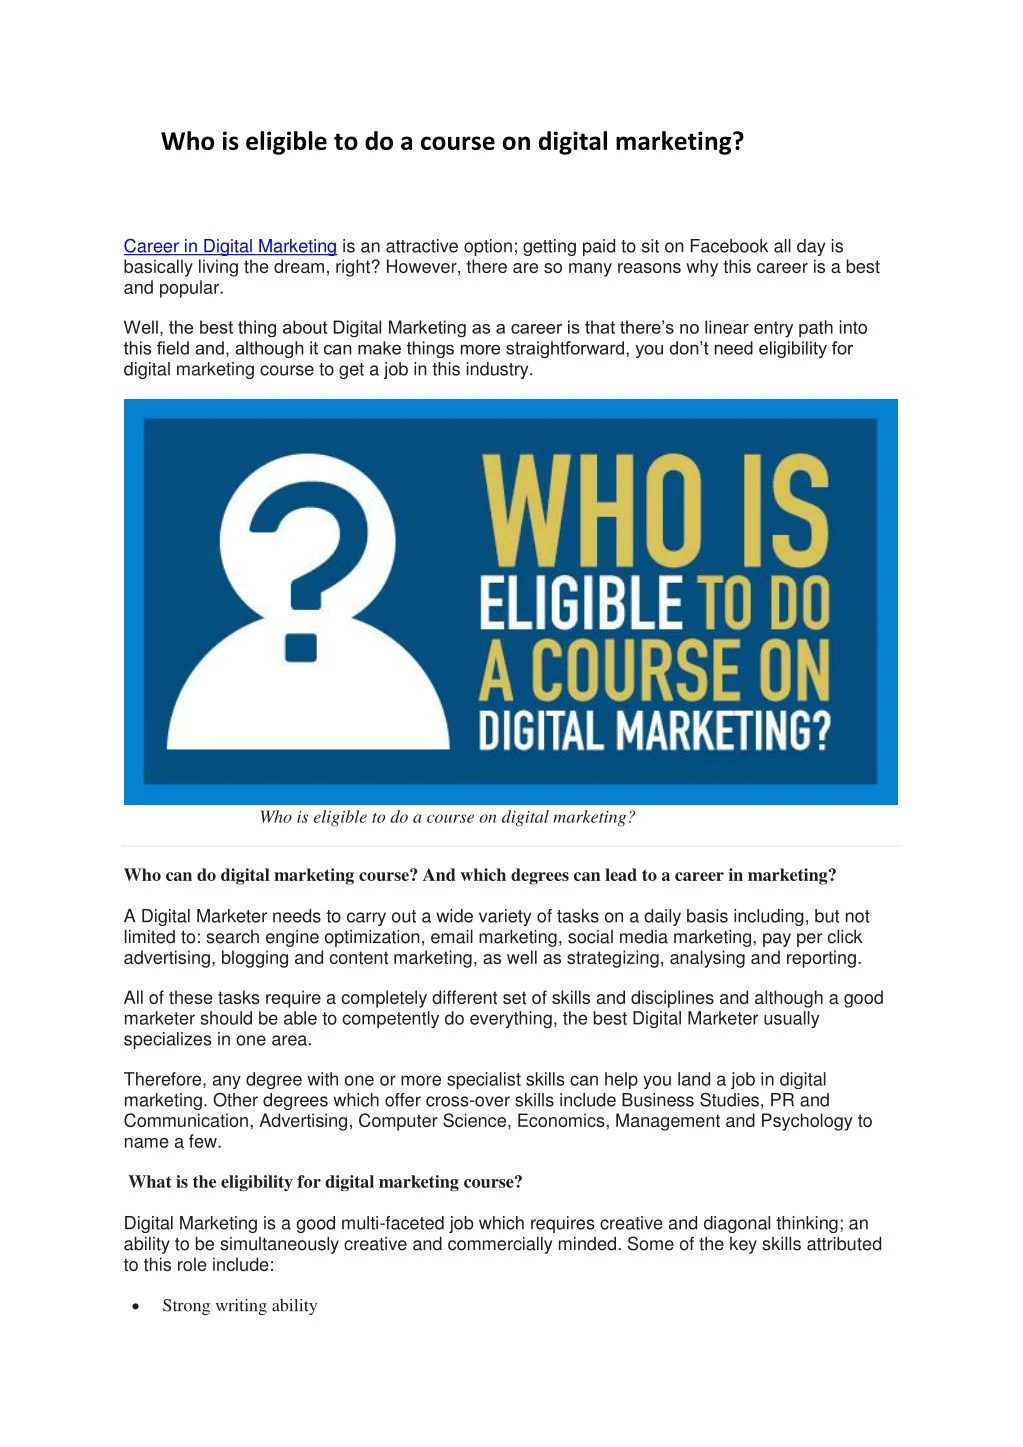 who is eligible to do a course on digital